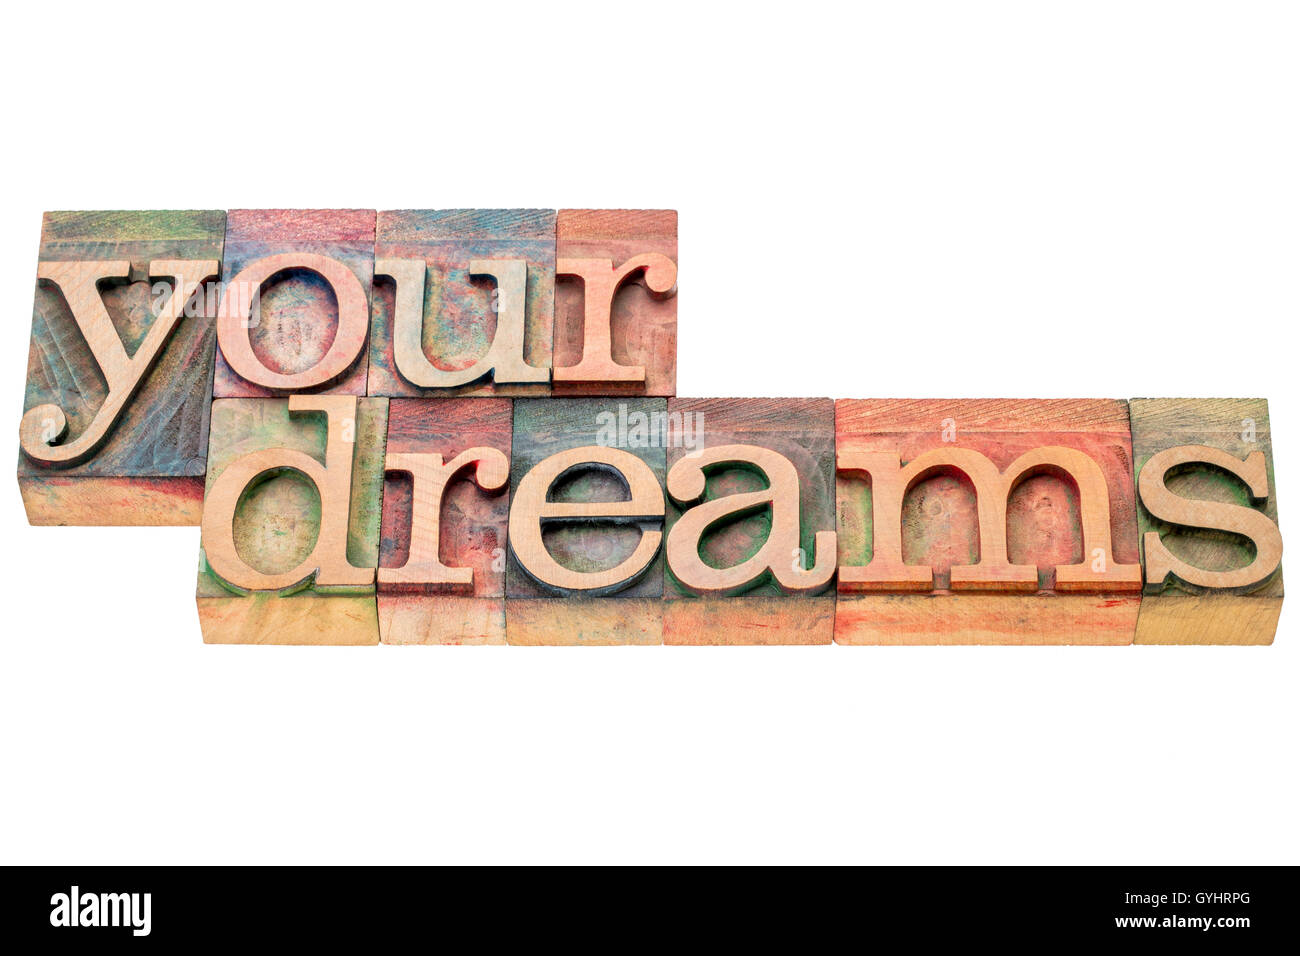 your dreams - isolated word abstract in letterpress wood type printing blocks stained by color inks Stock Photo